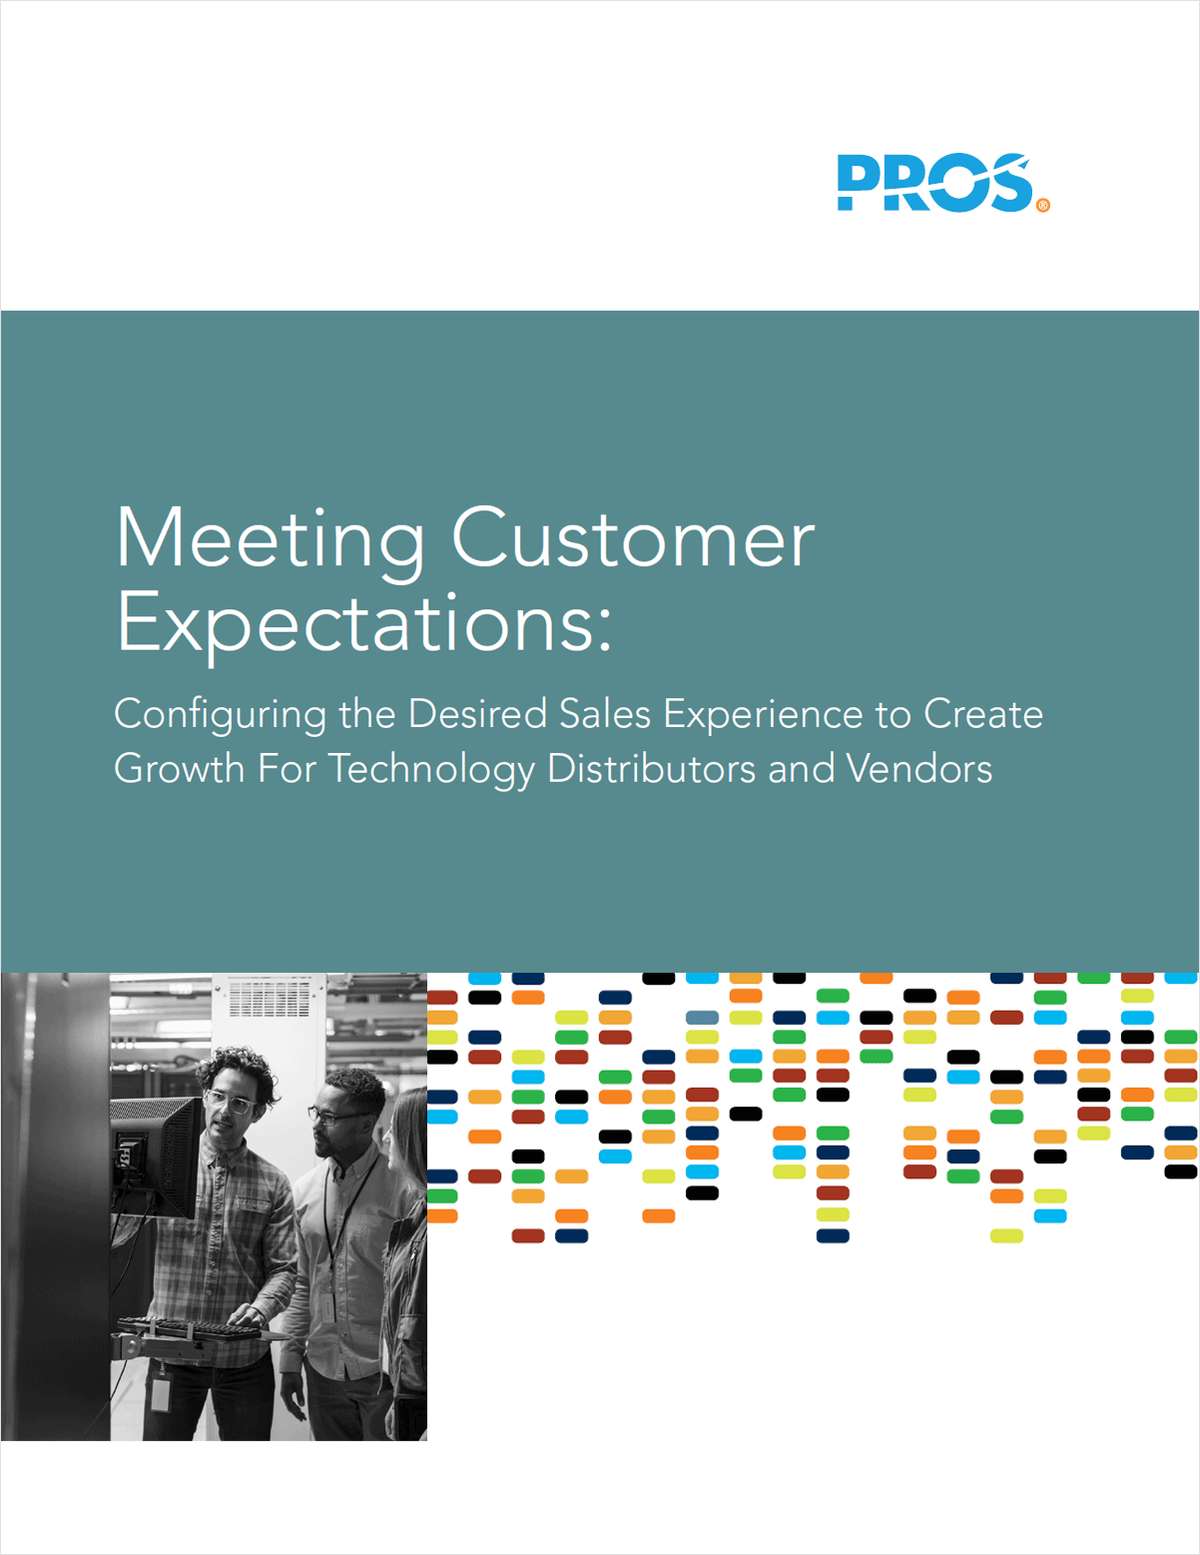 Meeting Customer Expectations: Configuring the Desired Sales Experience to Create Growth for Technology Distributors and Vendors